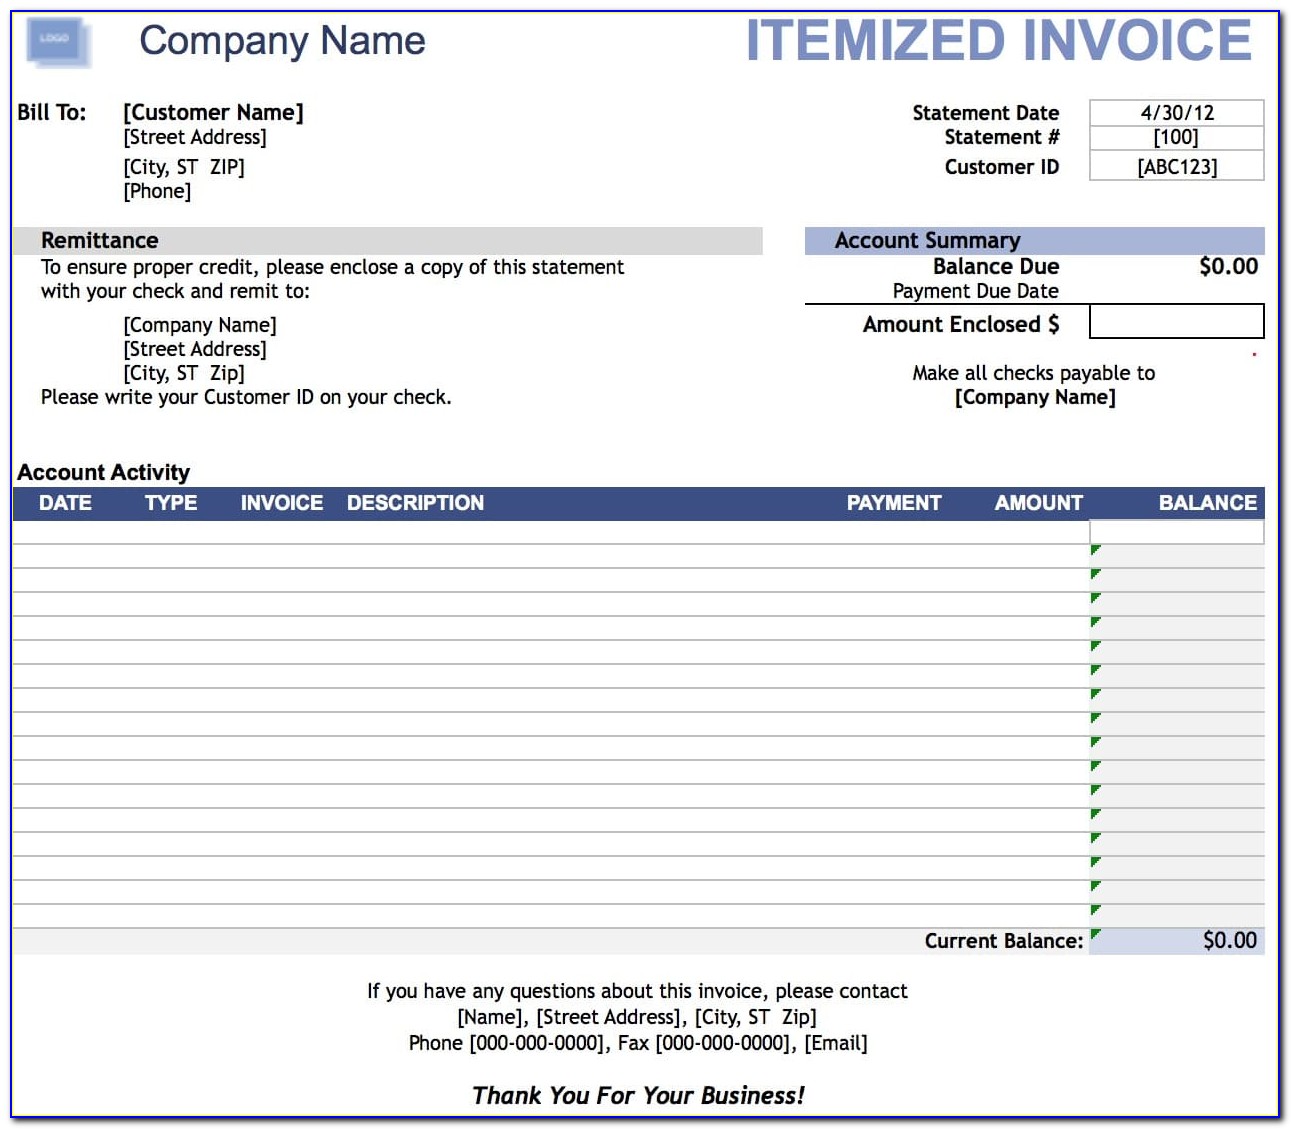 Itemized Invoice Template Excel